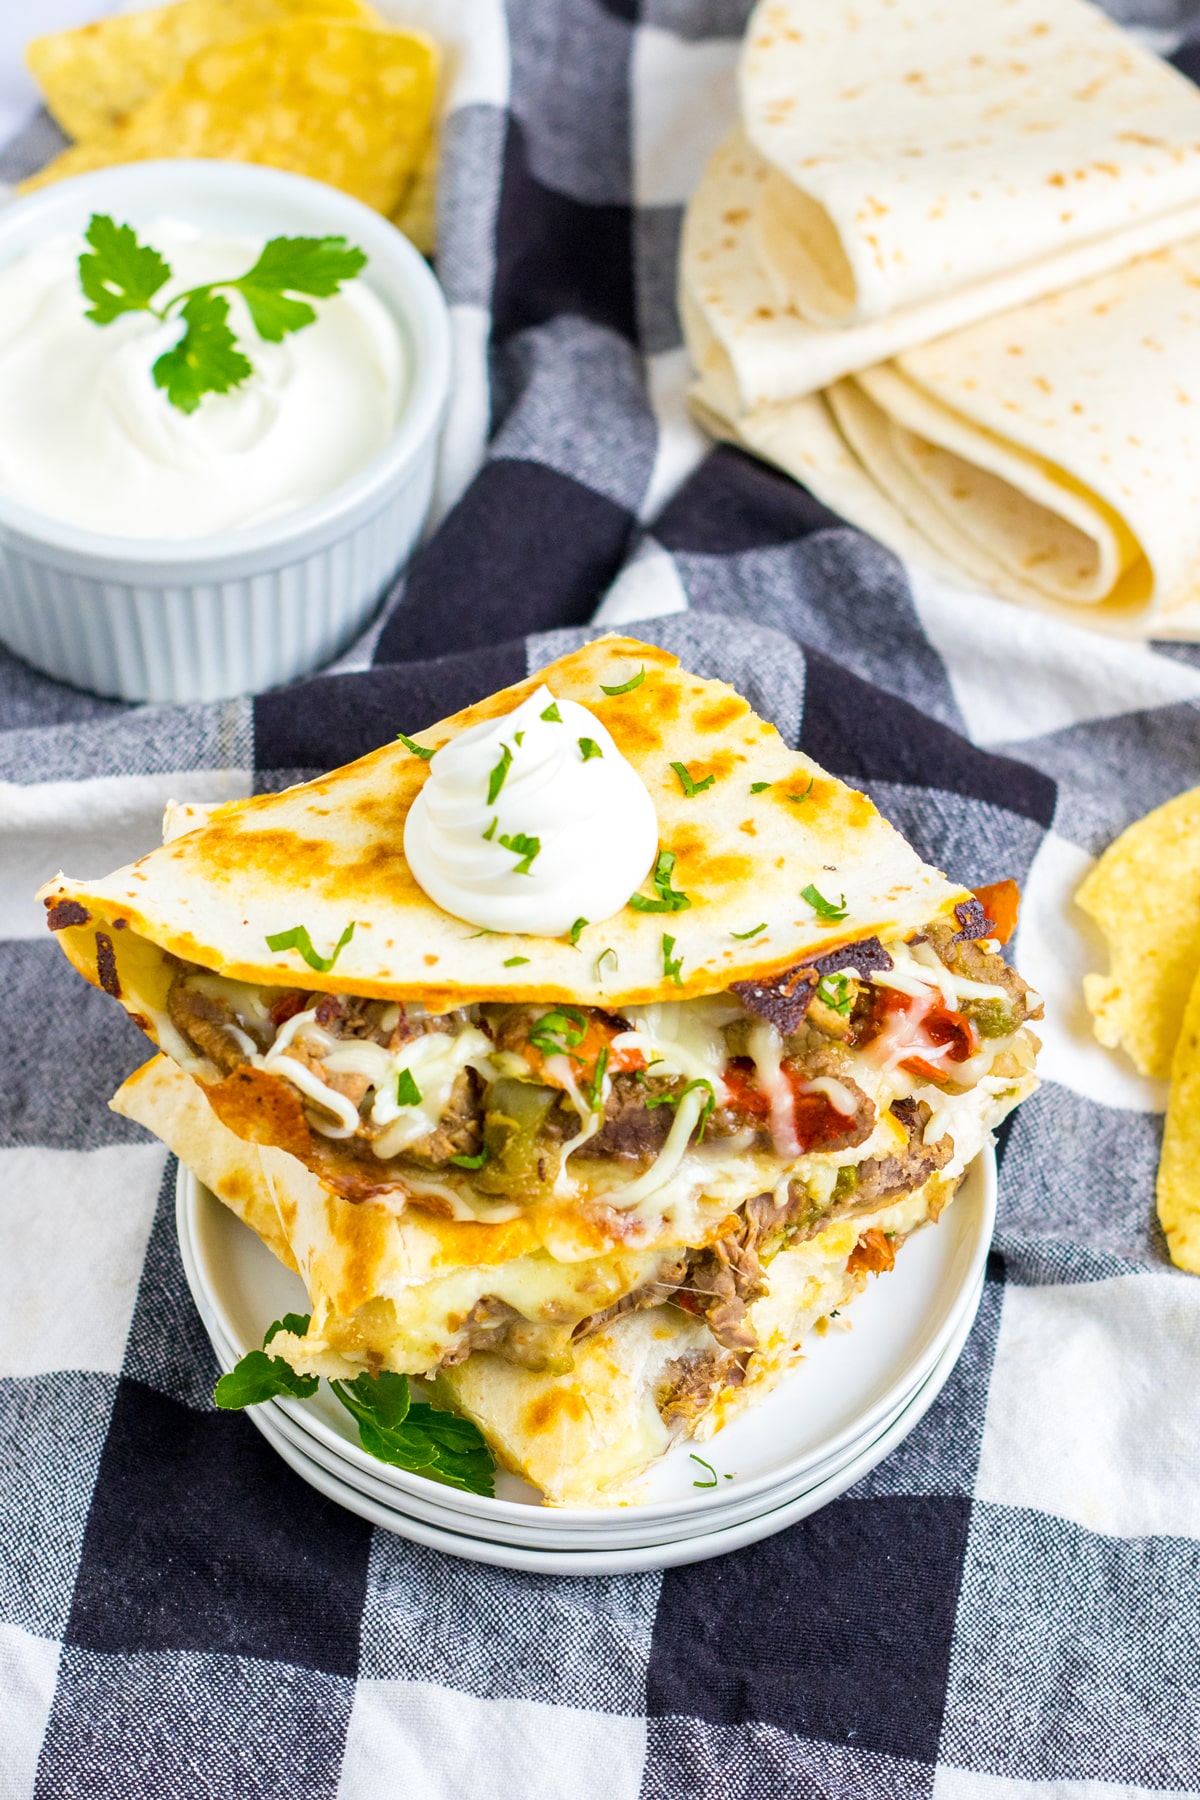 A serving of yummy Slow Cooker Cheesesteak Quesadillas on a serving plate